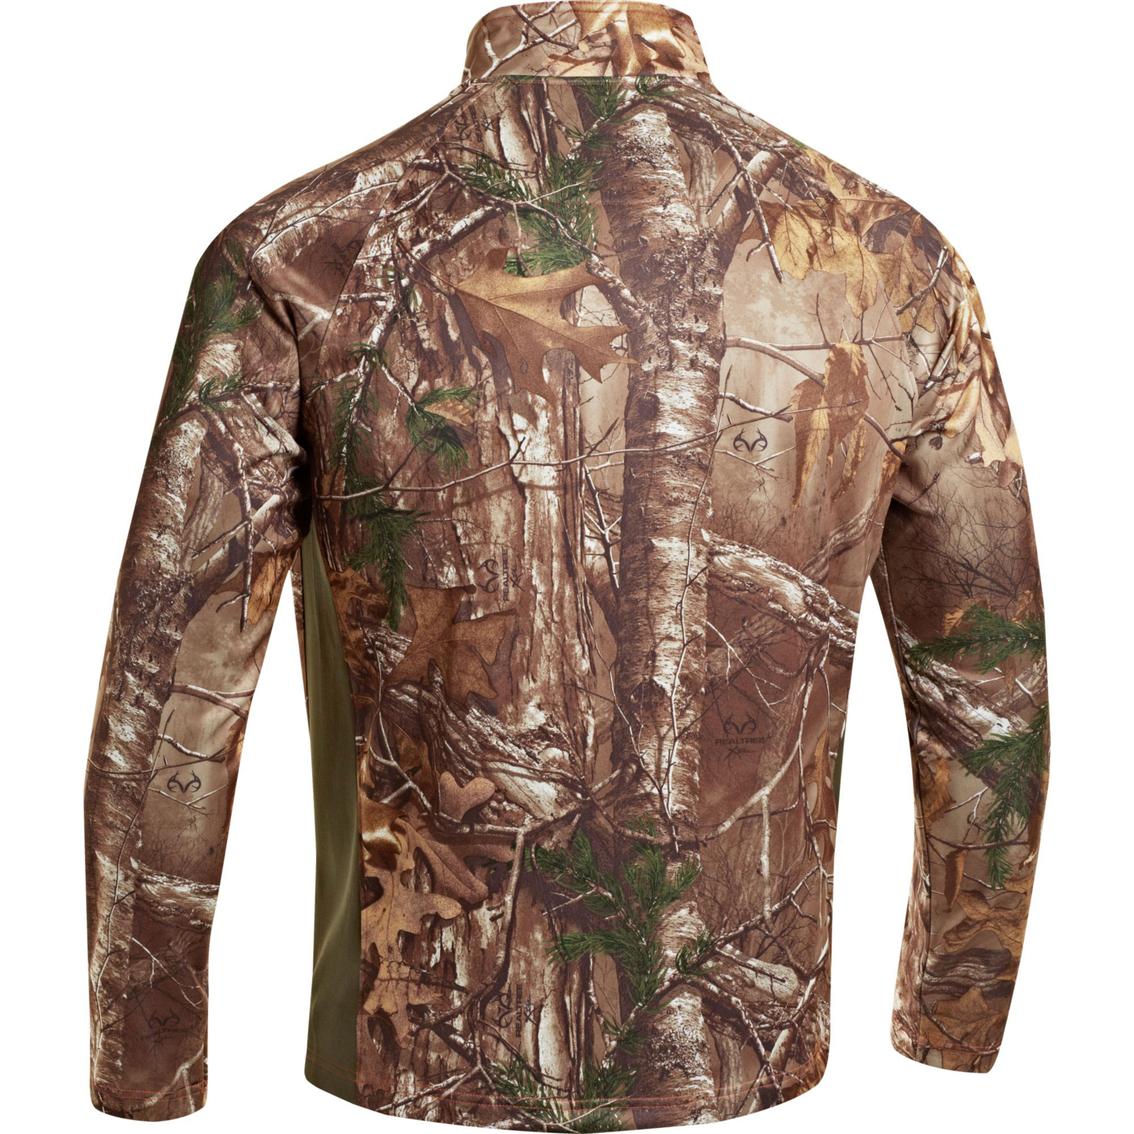 Under Armour Camo Performance Quarter Zip Pullover - Image 2 of 2